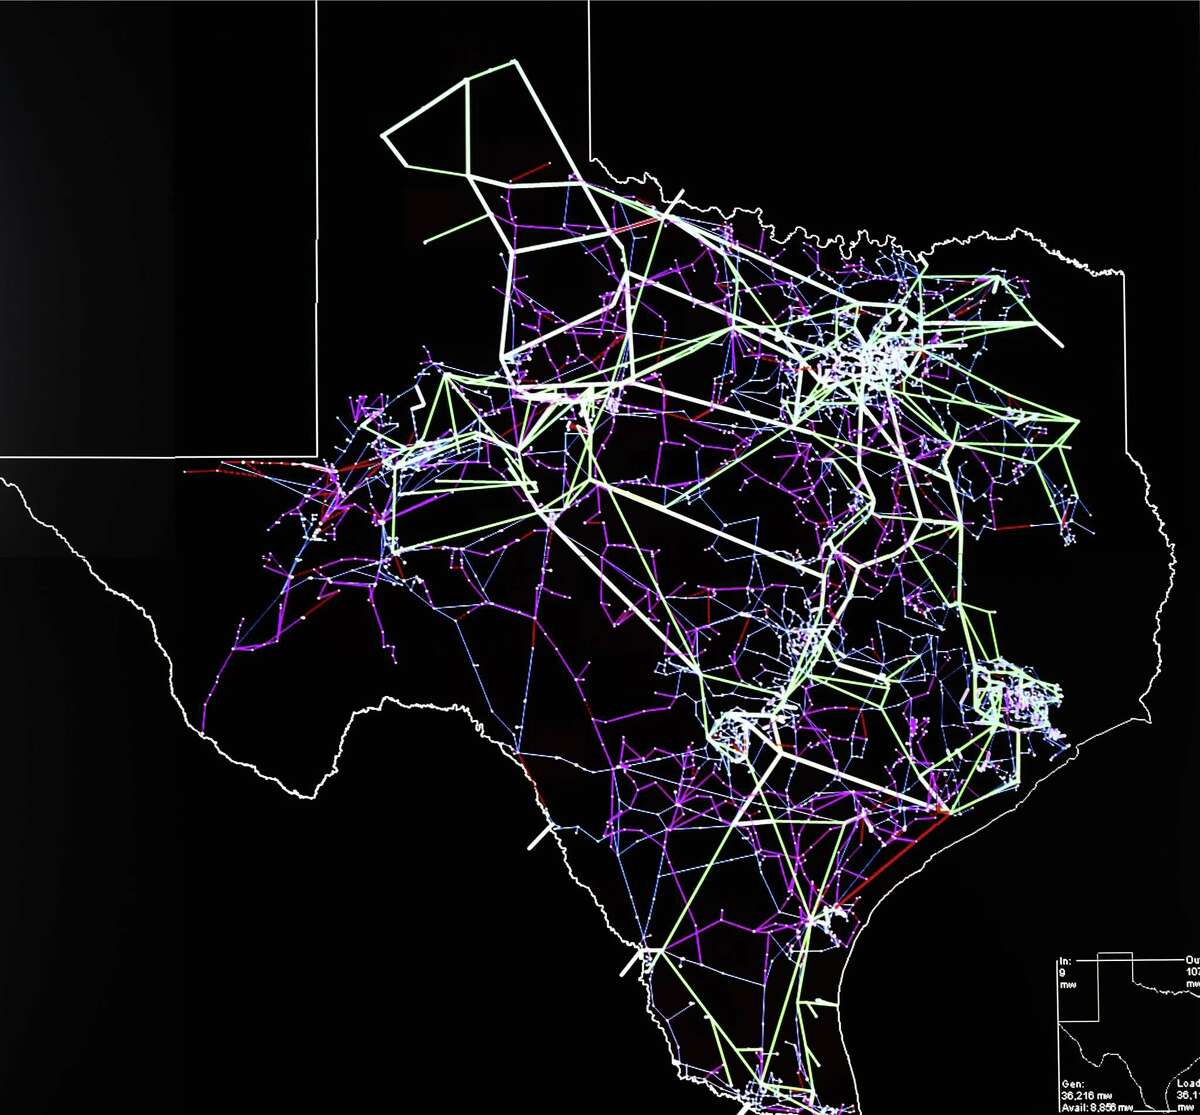 A map of the Electric Reliability Council of Texas’ (ERCOT) grid system at the grid operator’s control center near Austin.